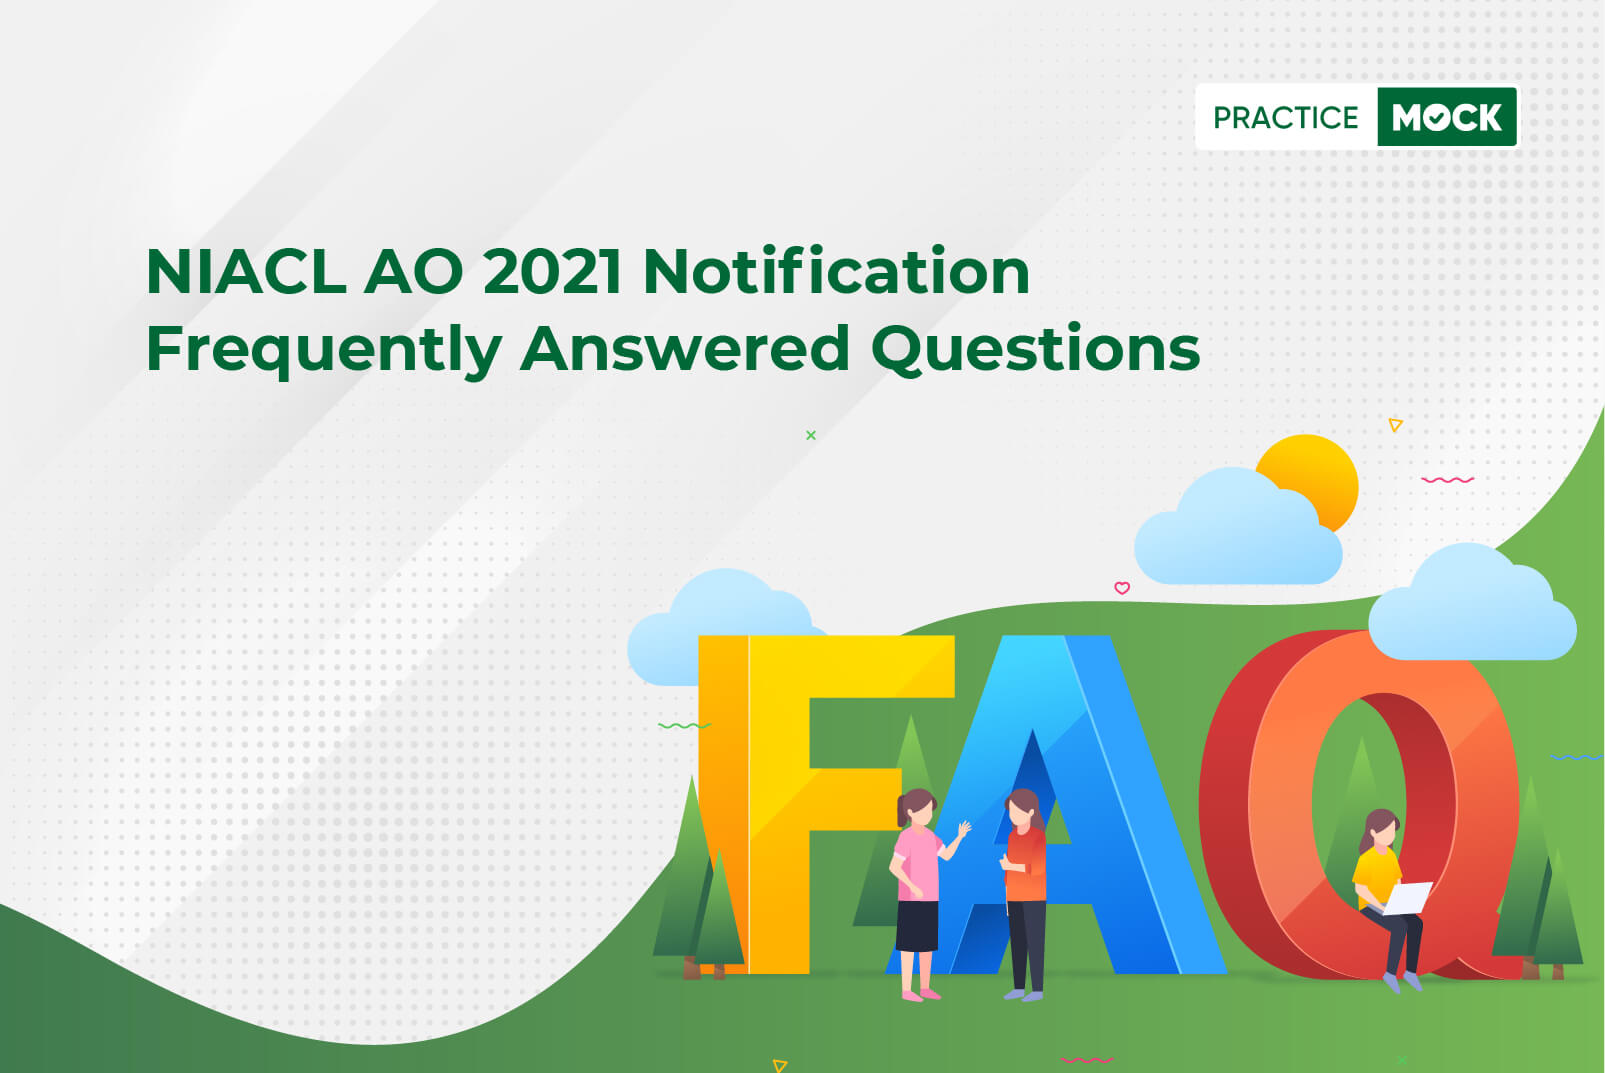 FAQs for NIACL AO 2021 Notification